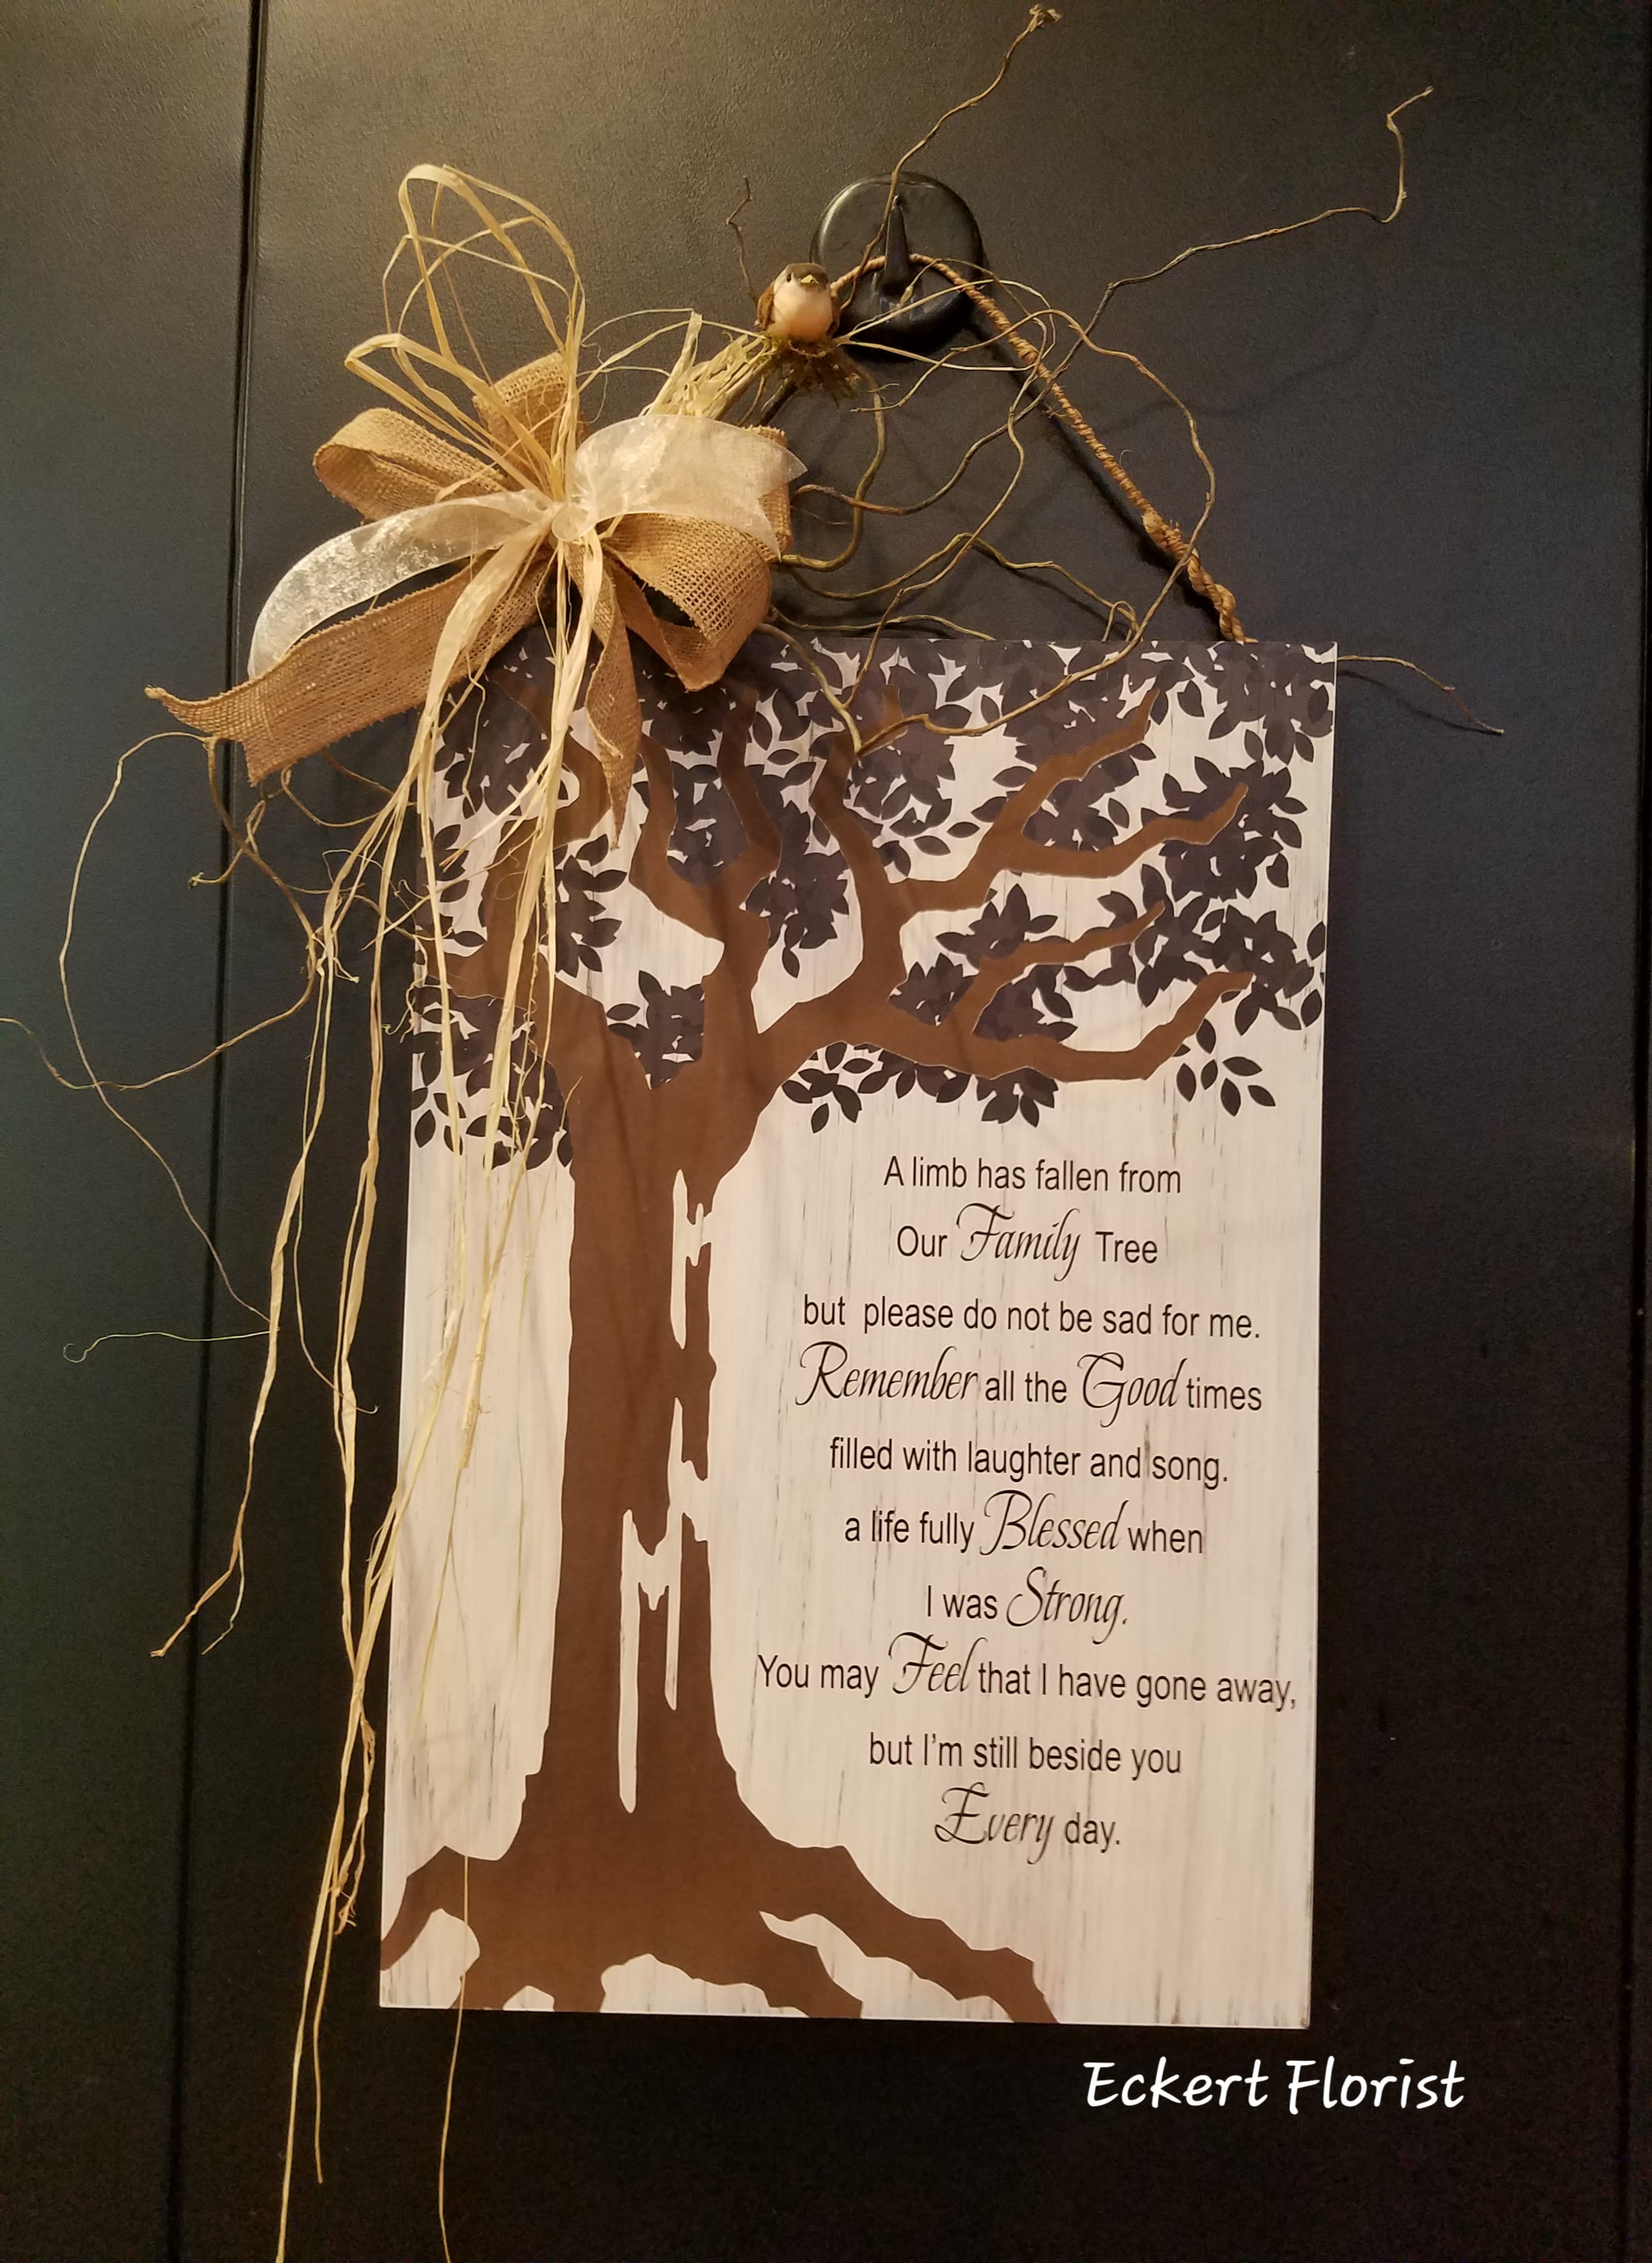 Eckert Florist's Our Family Tree Plaque *LOCAL DELIVERY ONLY  - **LOCAL DELIVERY ONLY* Wooden-like plaque measures approx. 14&quot; W X 21&quot; H This nice memorial keepsake may be sent to a funeral service or home. Sentiment: &quot;A limb has fallen from Our Family Tree but please do not be sad for me. Remember all the Good times filled with laughter and song. A life Blessed when I was Strong.You may Feel that I have gone away, but I'm still beside you Every day.&quot; 